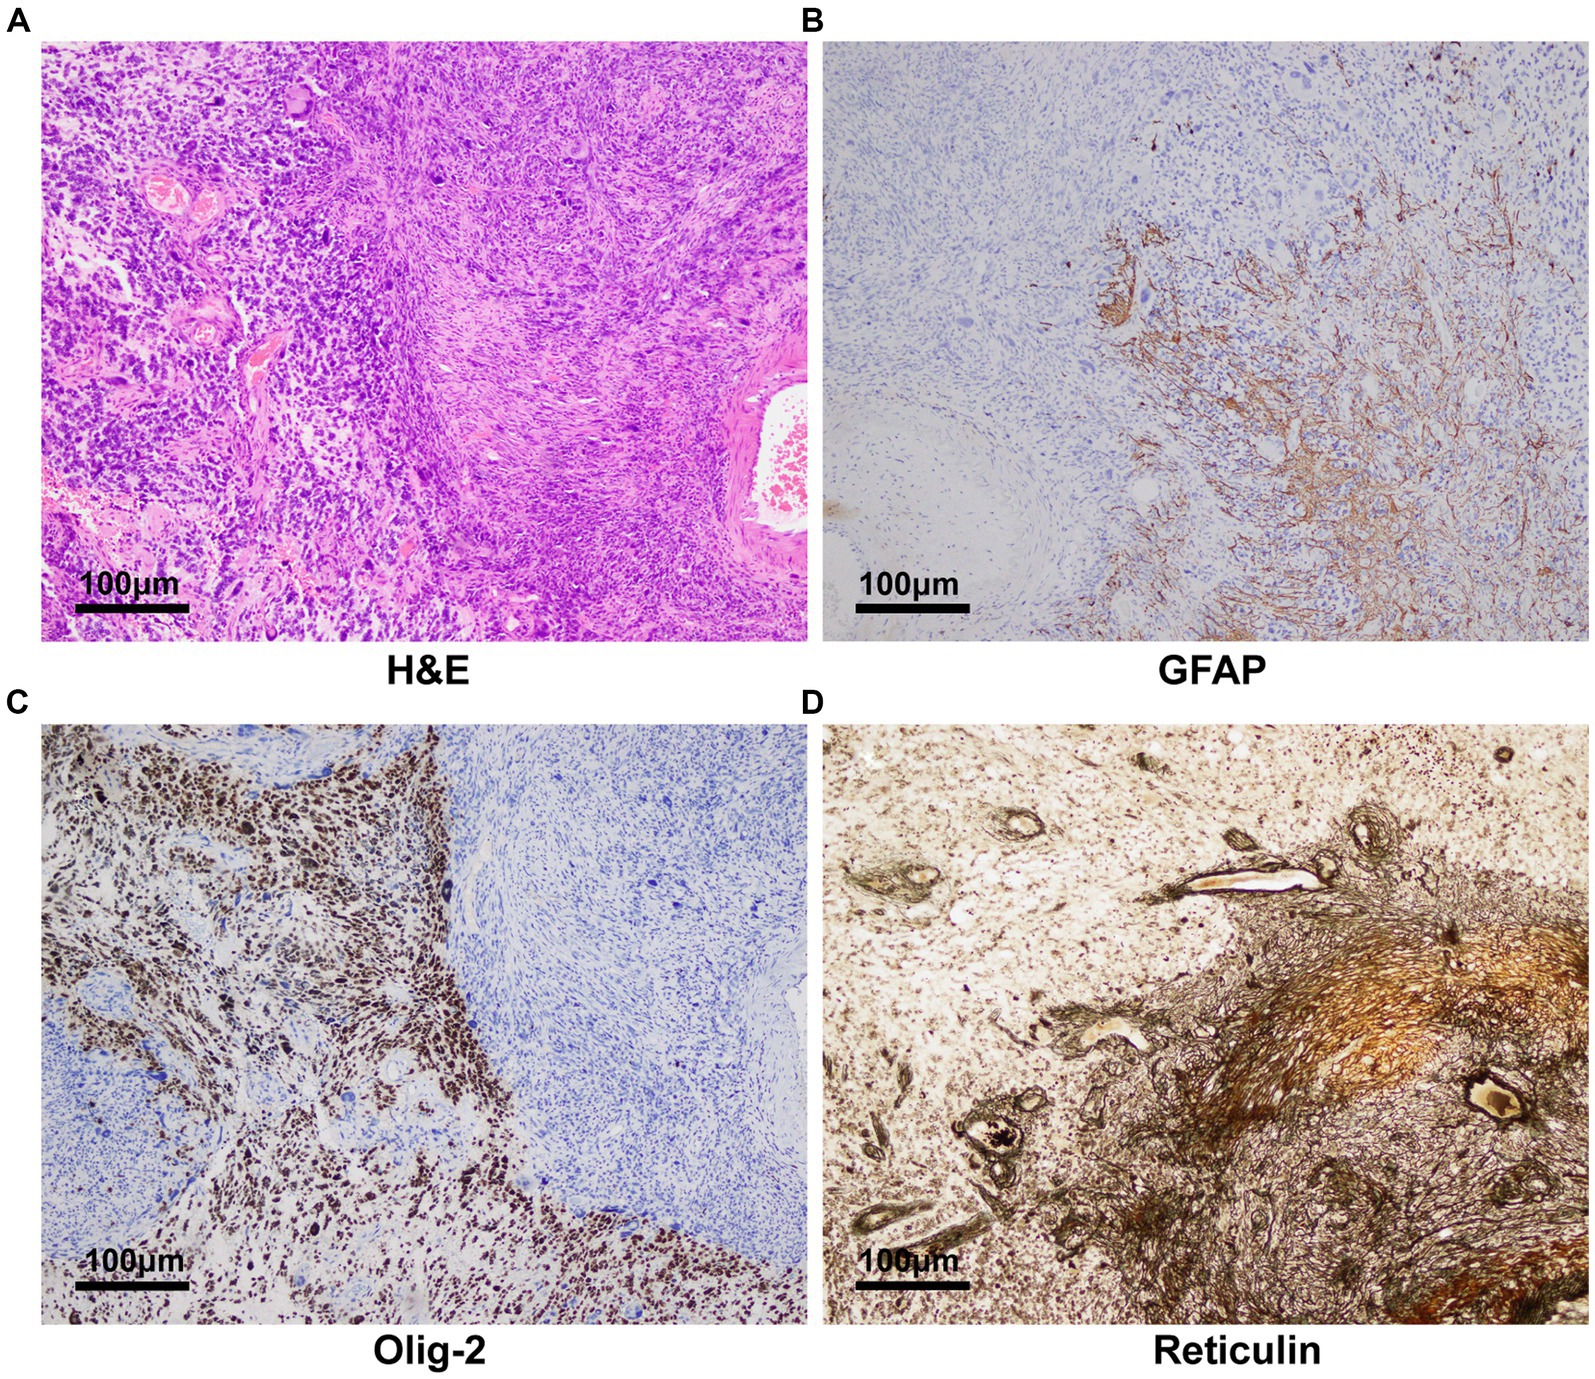 Frontiers | A case report: Gliosarcoma associated with a germline 